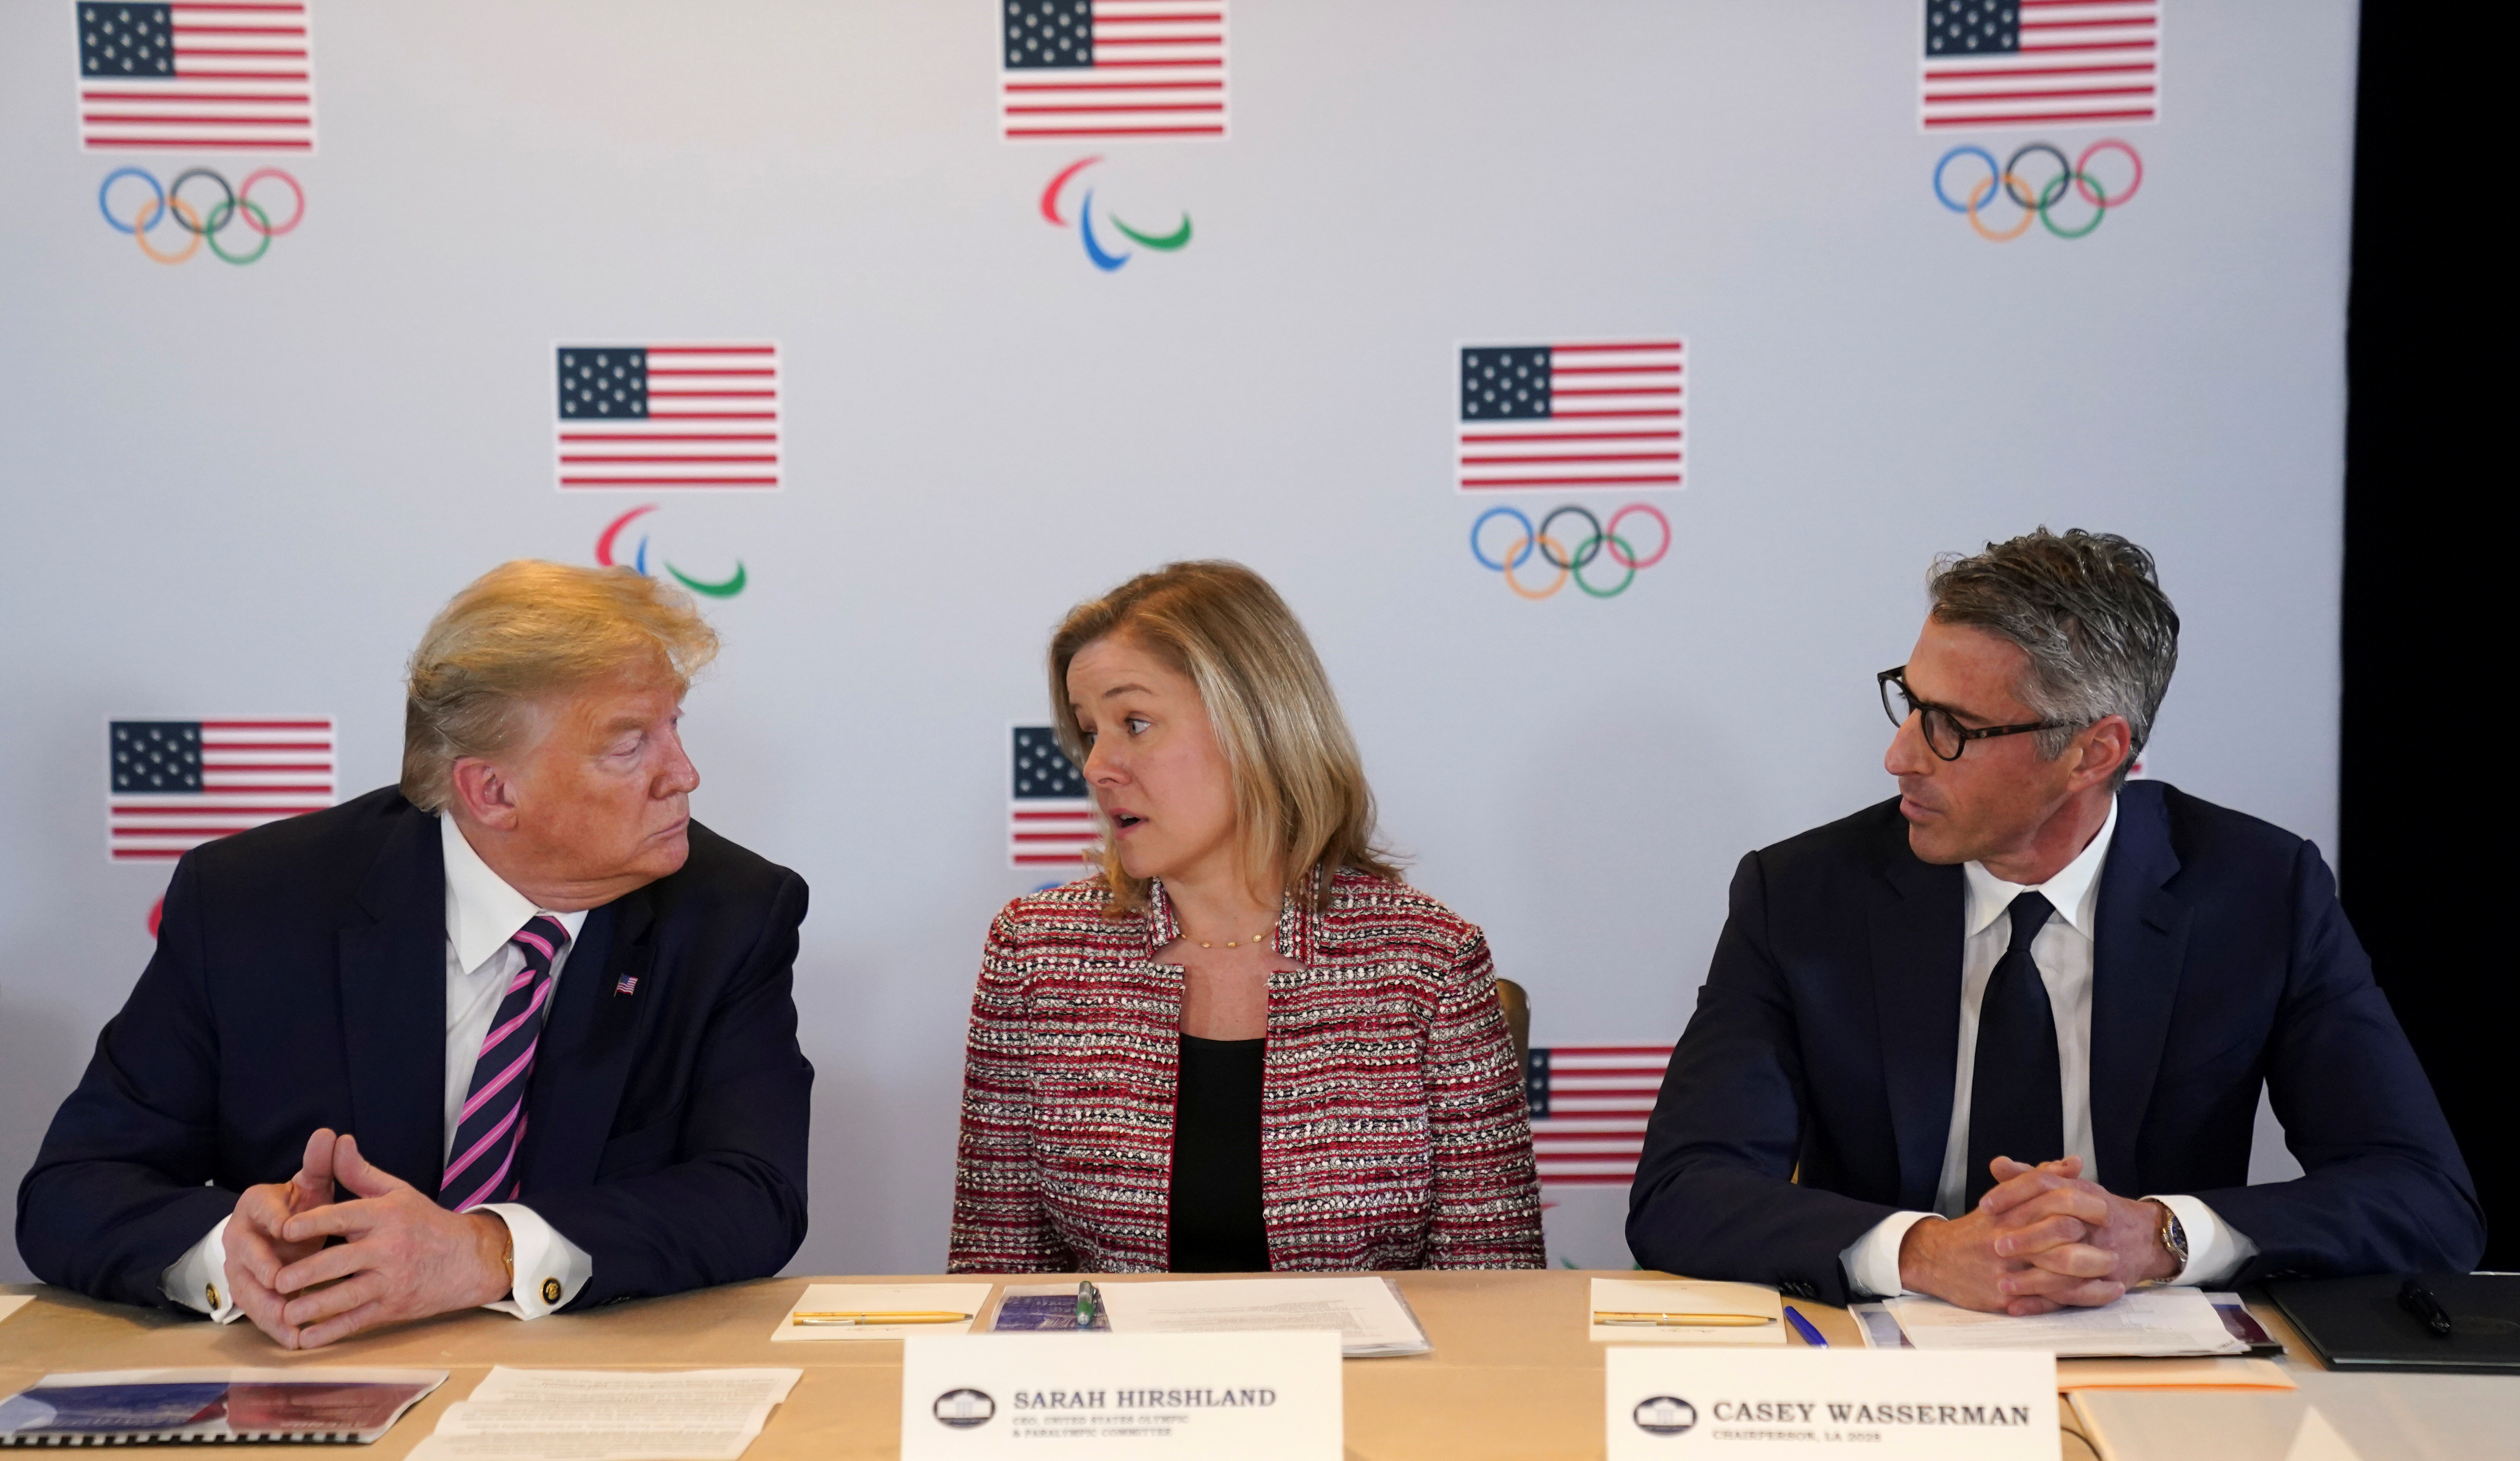 U.S. President Donald Trump talks with Sarah Hirshland, CEO of the United States Olympic & Paralympic Committee and Casey Wasserman, chairman of LA 2028, during an LA 2028 Olympic briefing in Los Angeles, California, February 18, 2020. REUTERS/Kevin Lamarque